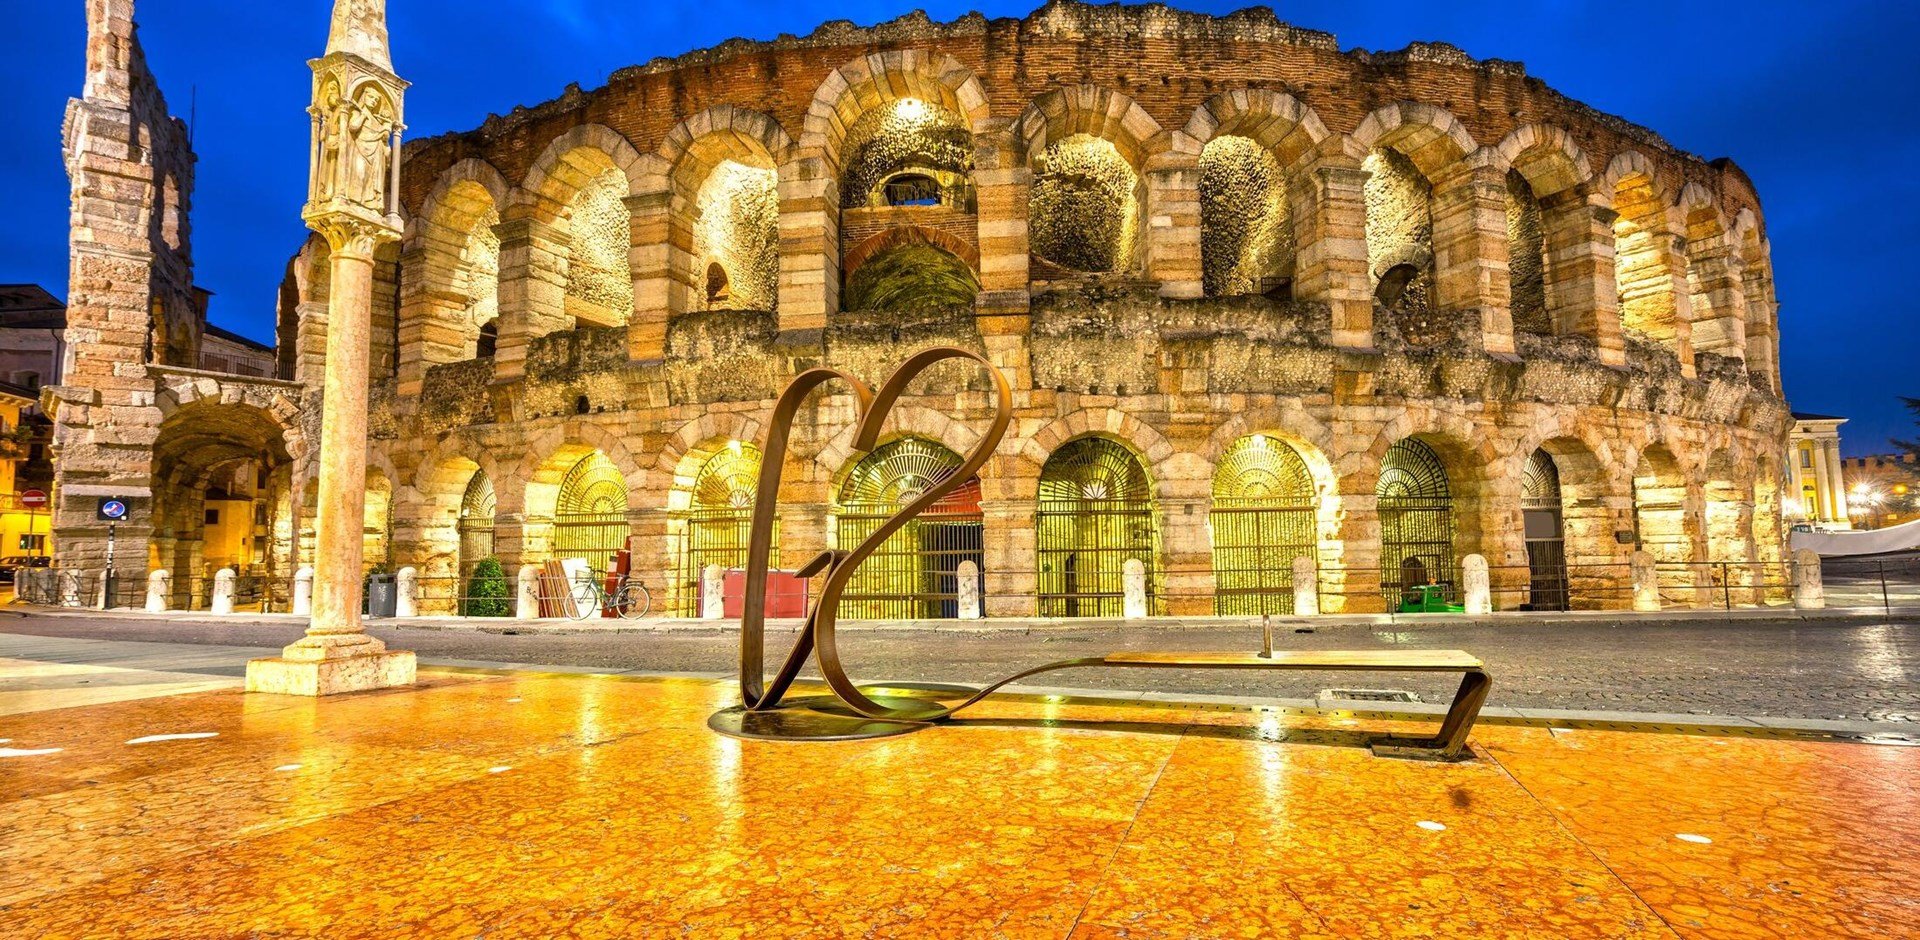 Verona, Italy. Night picture of the famous Arena